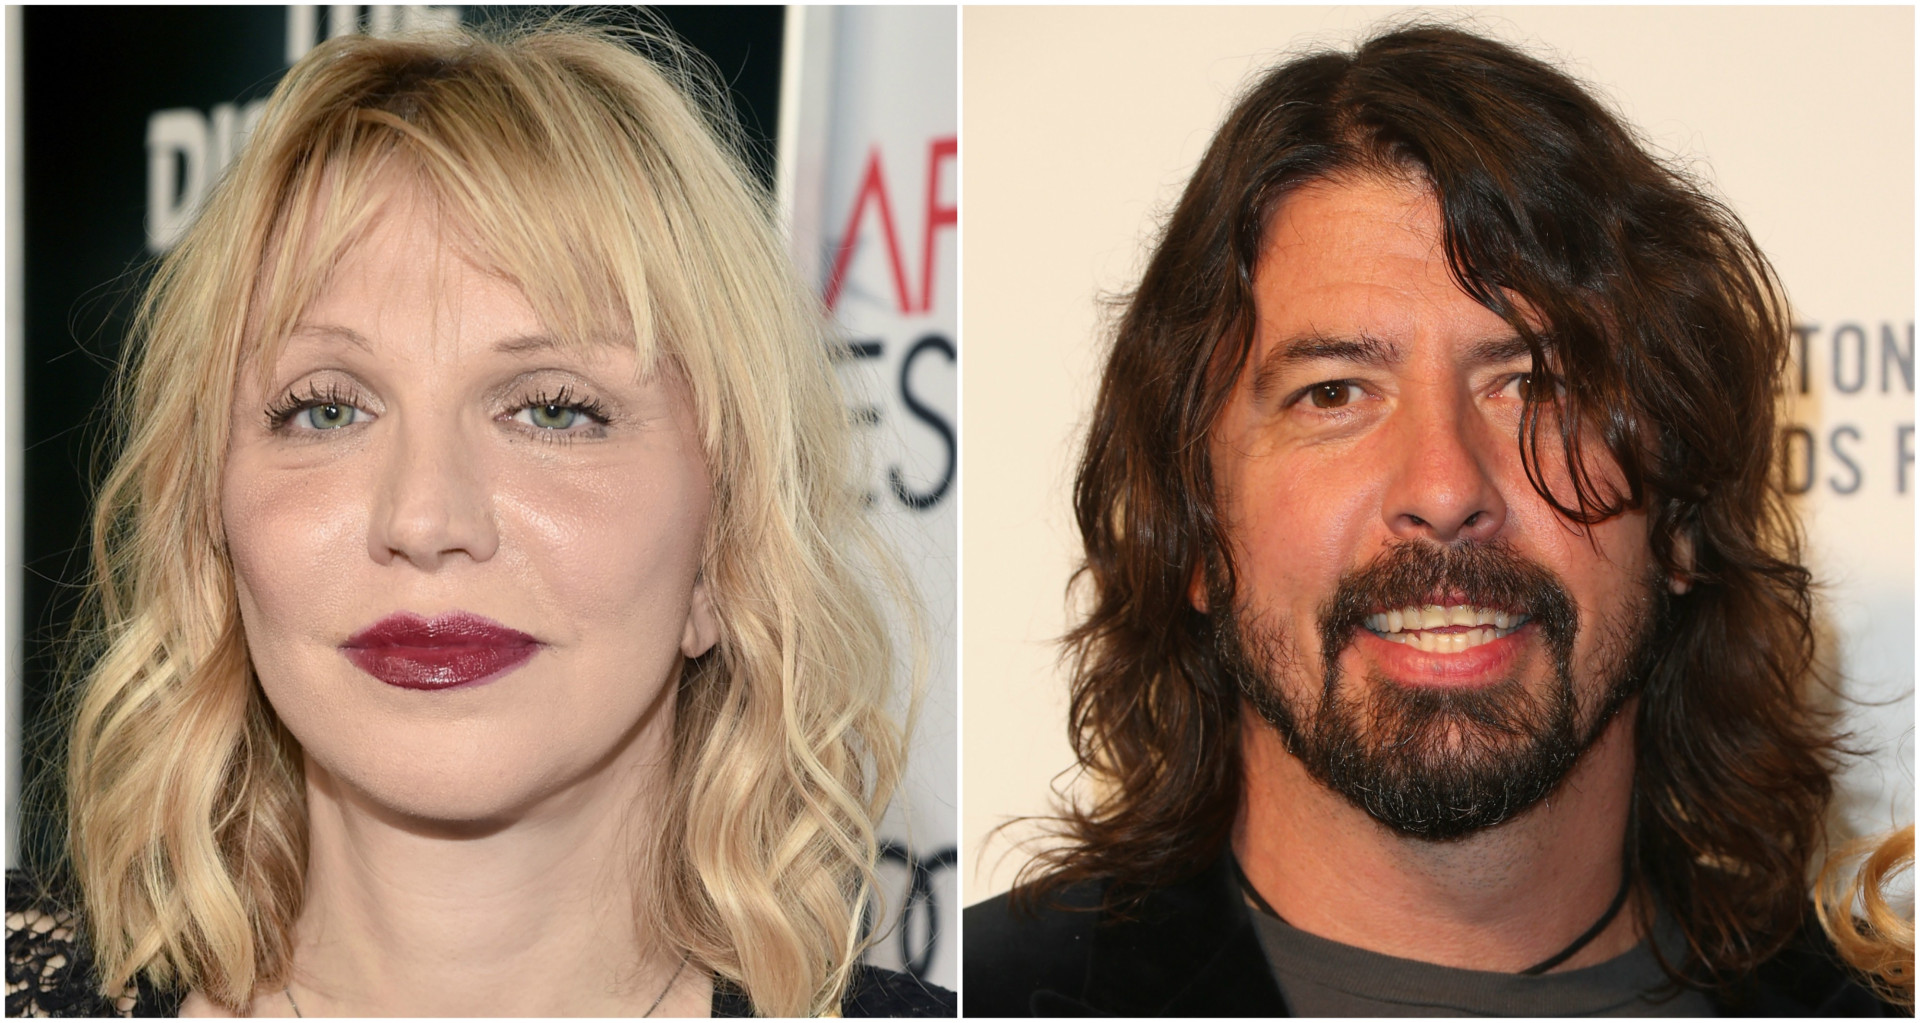 <p>According to the Mirror, the relationship between Kurt Cobain and Courtney Love was rocky, resulting in disputes within Nirvana. Love claimed in 2012 that Grohl attempted to woo her 19-year-old daughter, Frances Bean Cobain.</p>